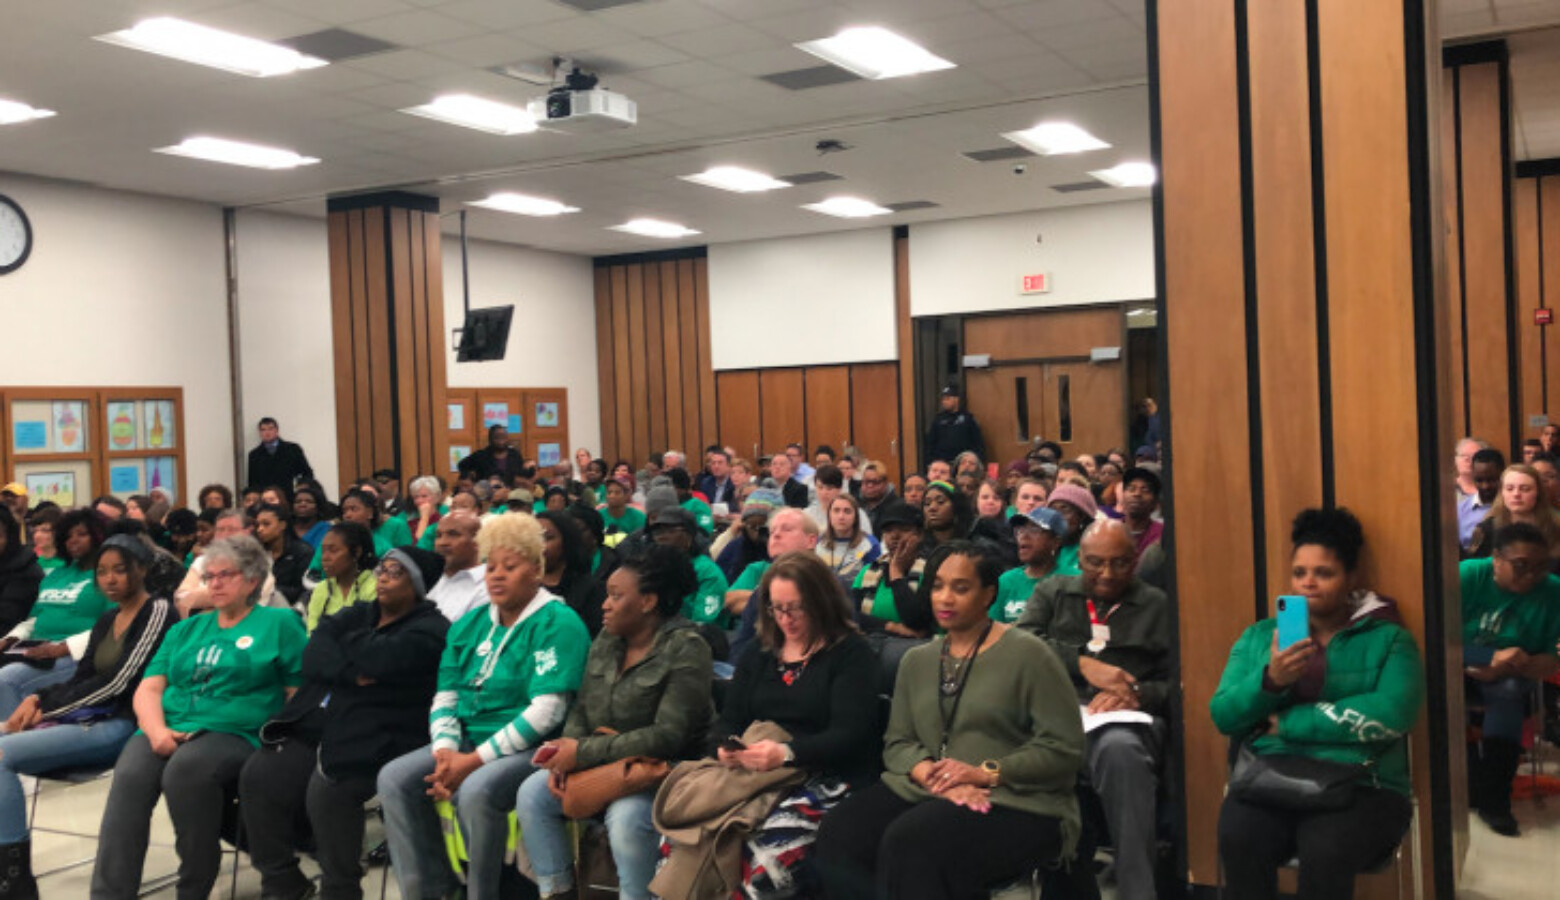 A packed room for a meeting of the Indianapolis Public Schools Board of Commissioners in January 2020.